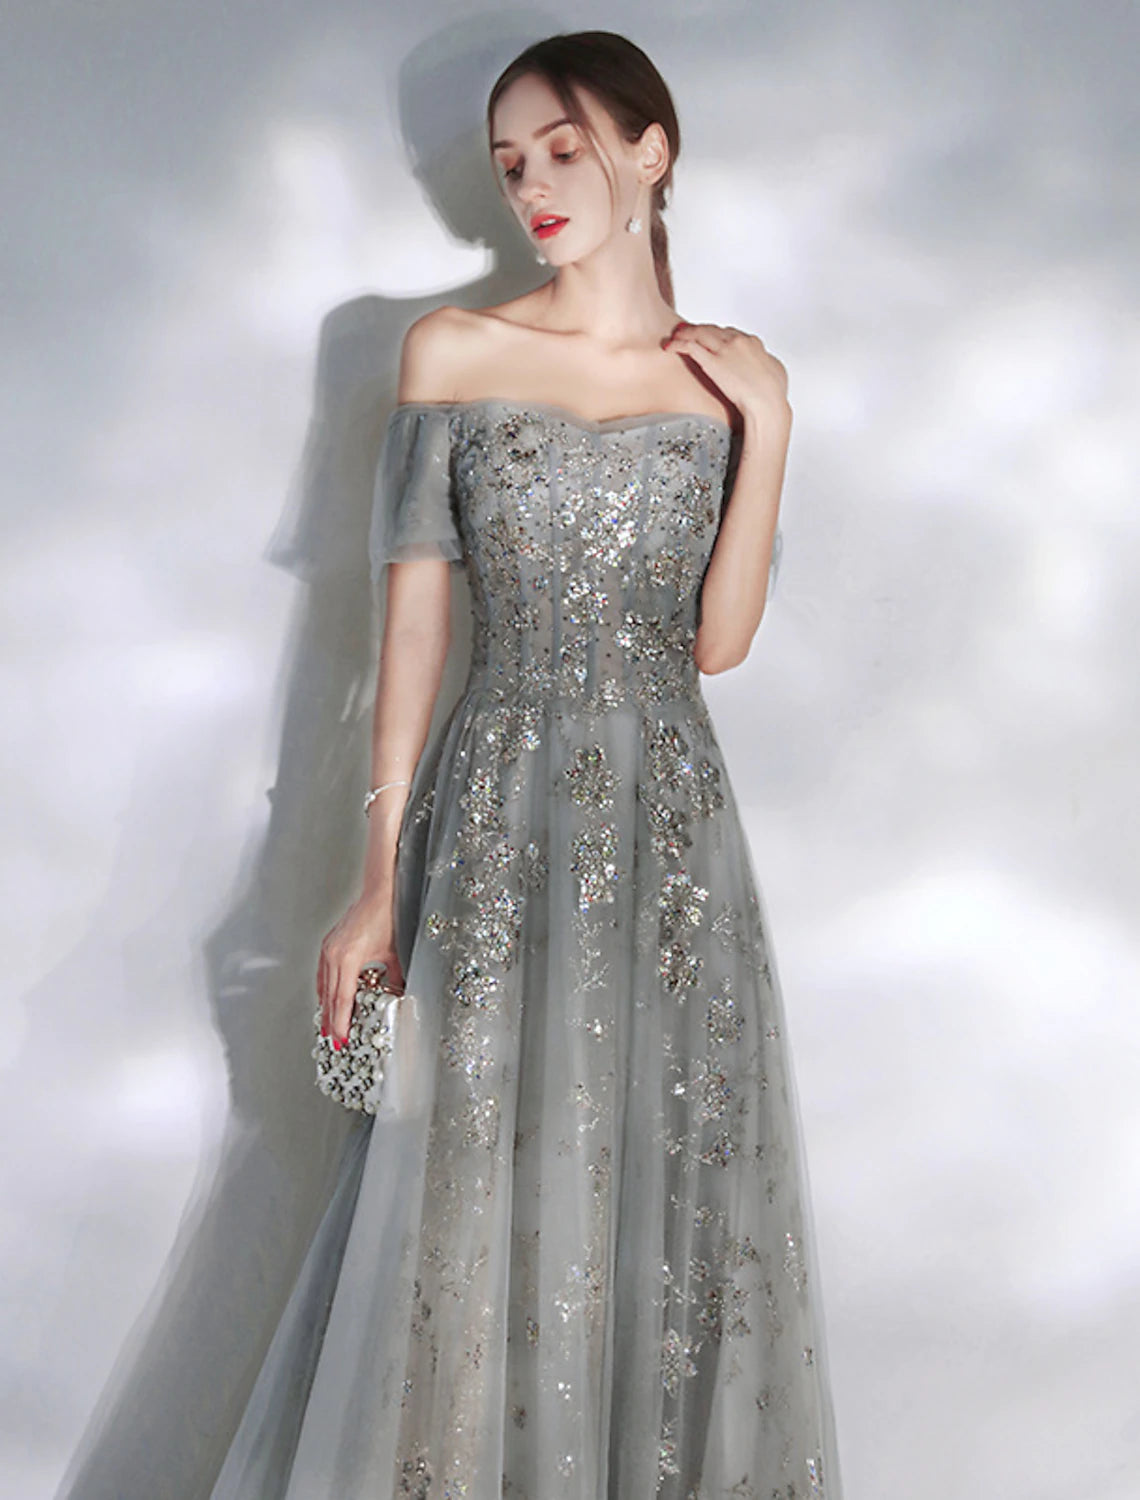 A-Line Evening Gown Glittering Dress Engagement Floor Length Short Sleeve Off Shoulder Spandex with Sequin Appliques